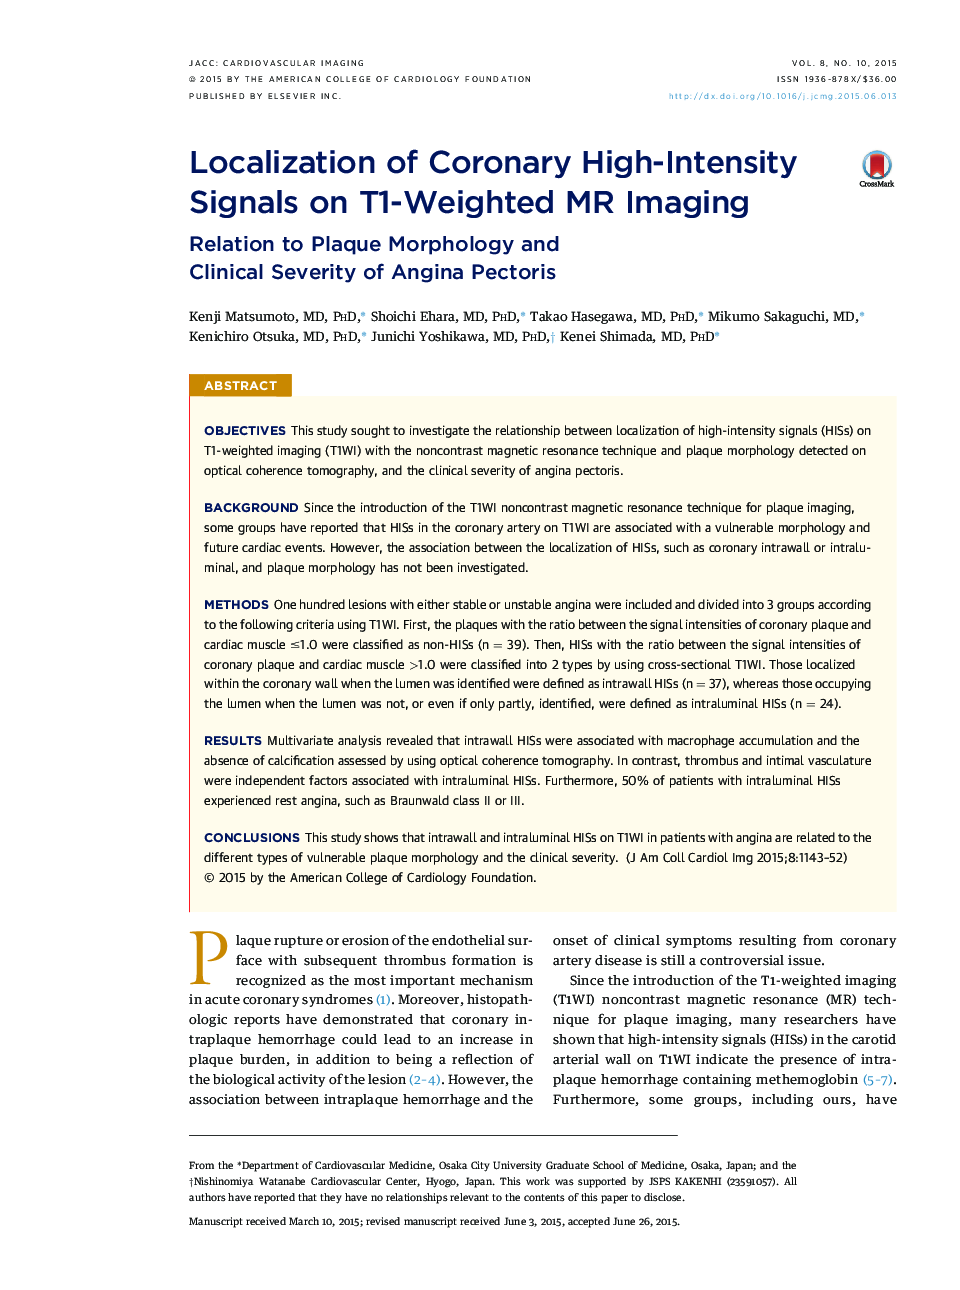 Localization of Coronary High-Intensity Signals on T1-Weighted MR Imaging : Relation to Plaque Morphology and Clinical Severity of Angina Pectoris